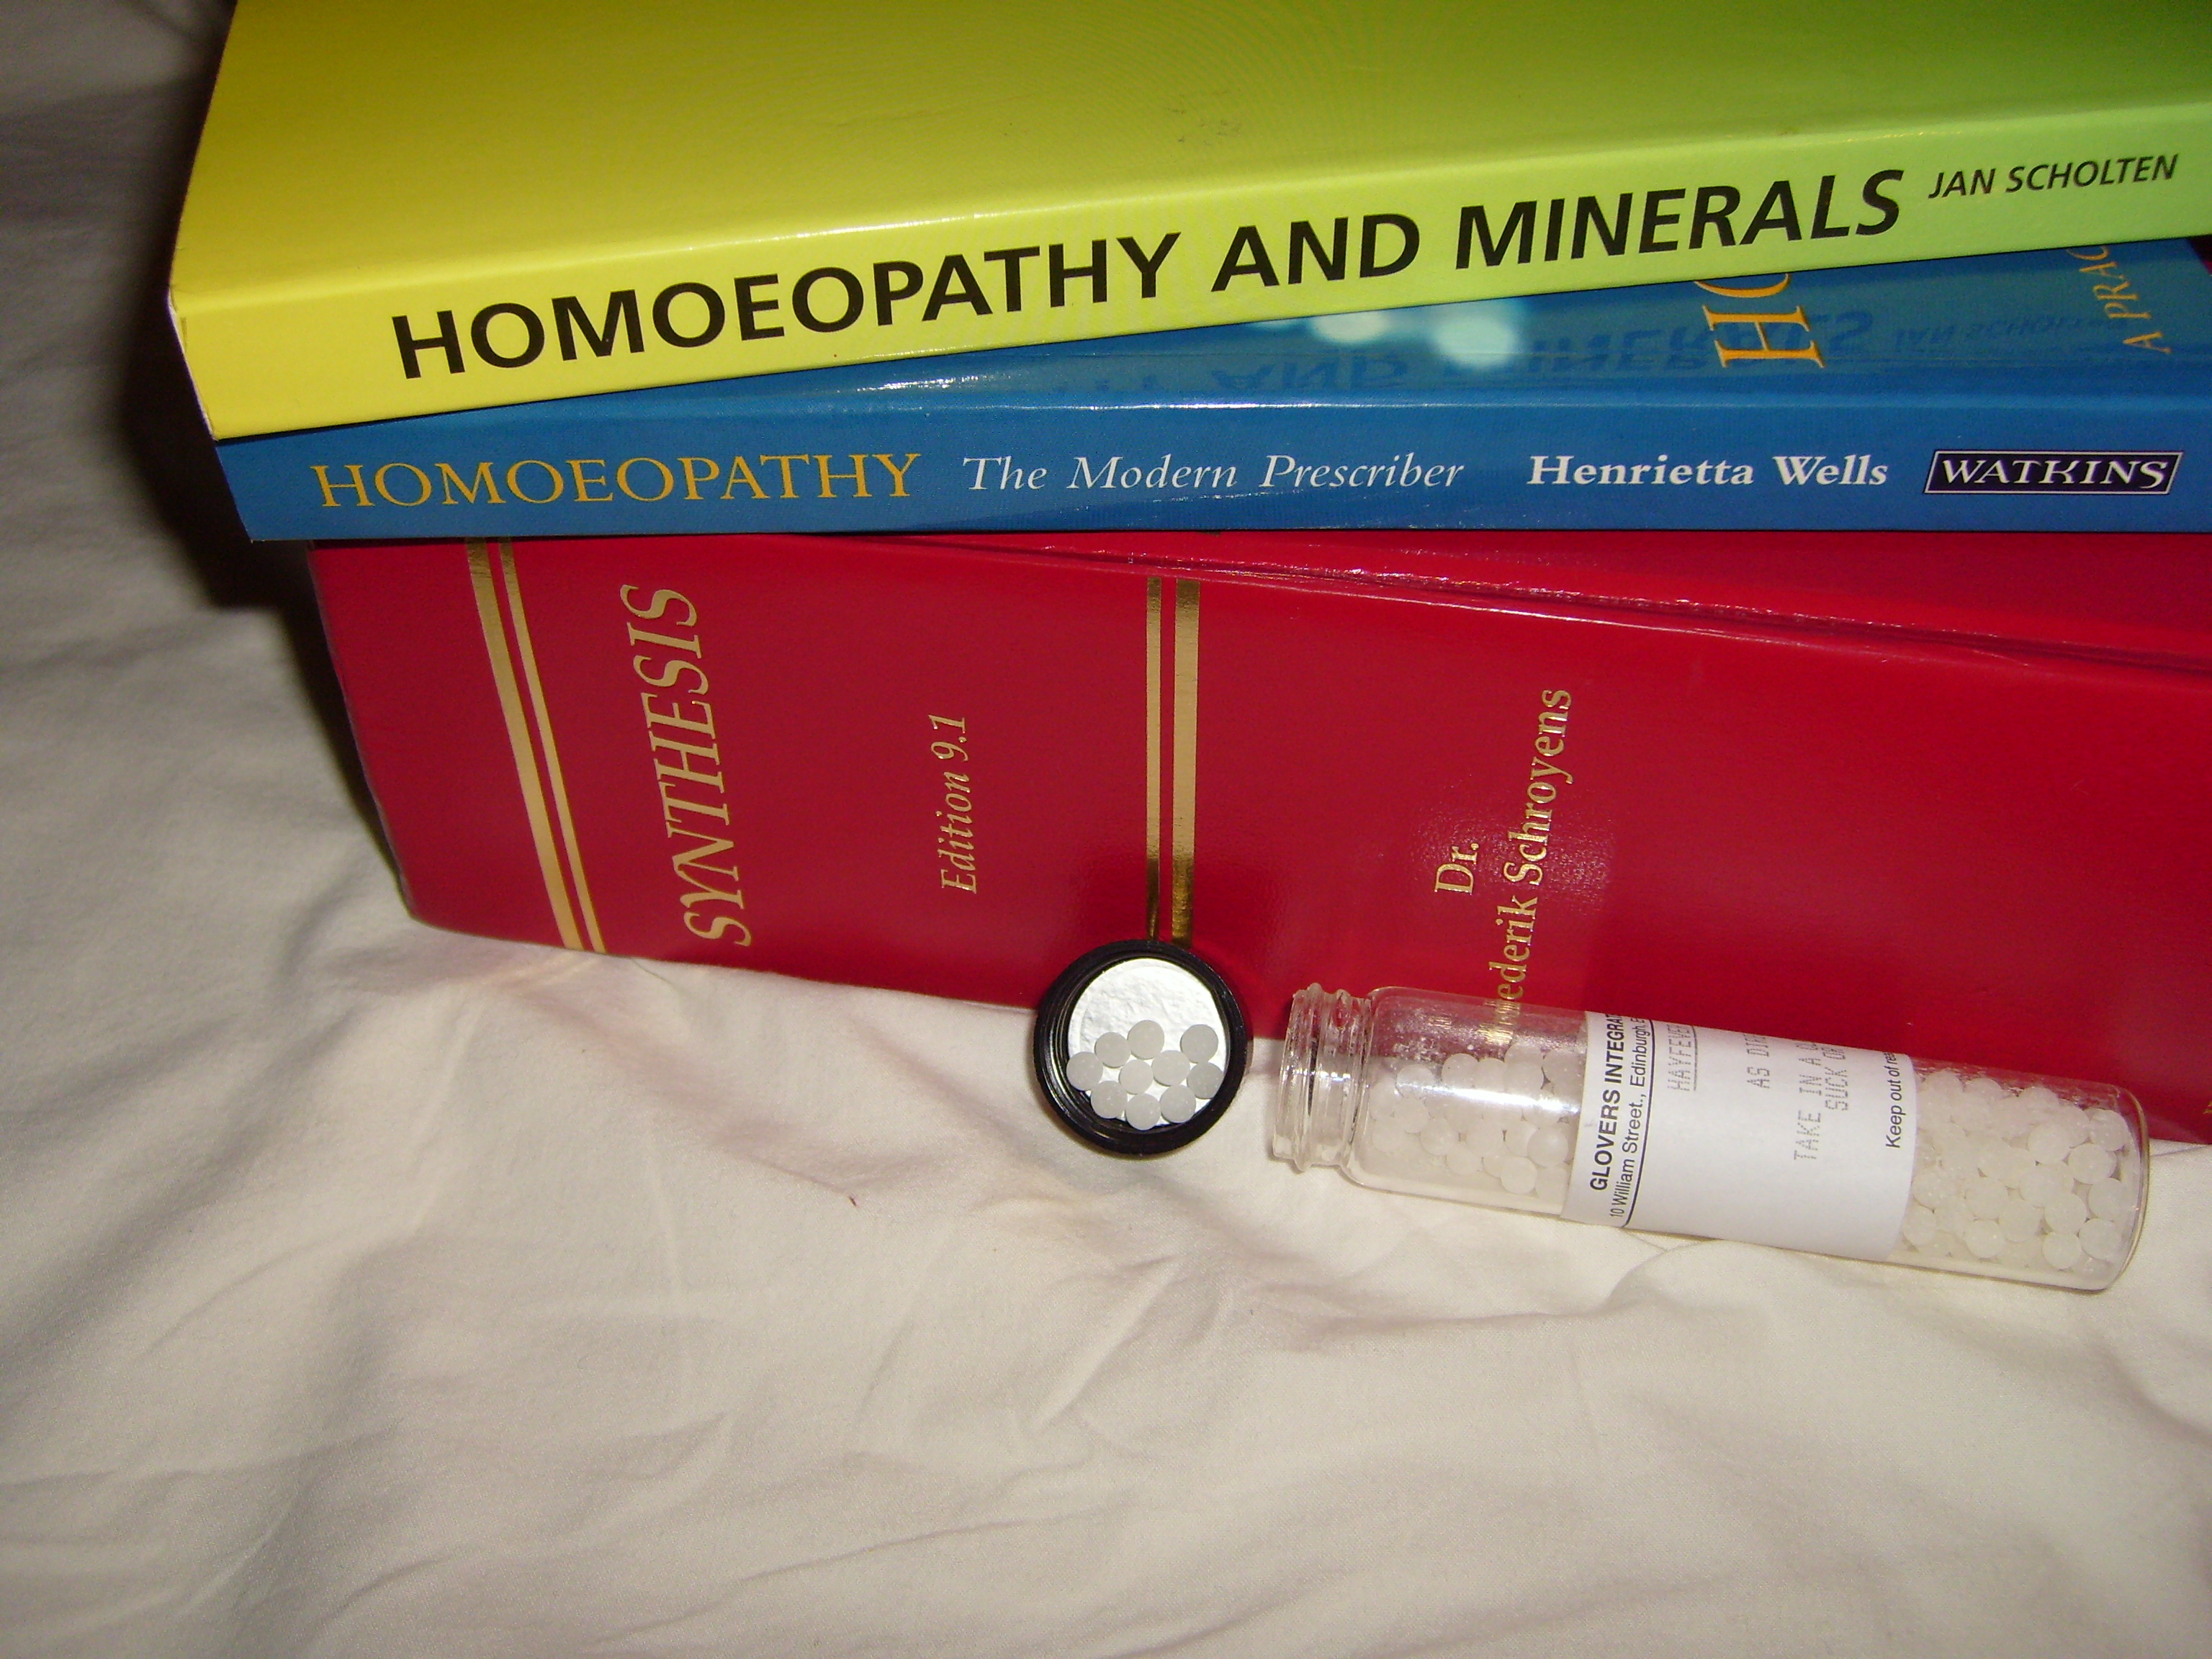 Moonbeam homeopathic books and remedies